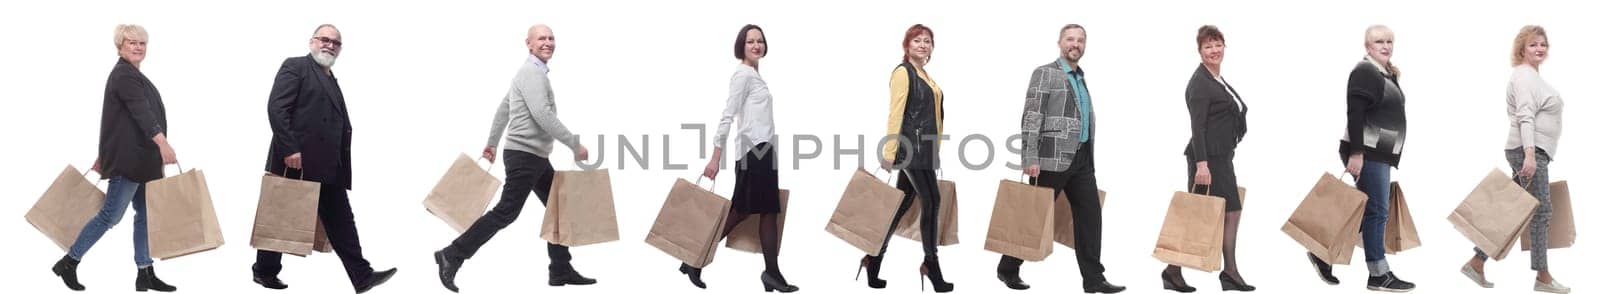 a line of people with shopping bags. side view by asdf